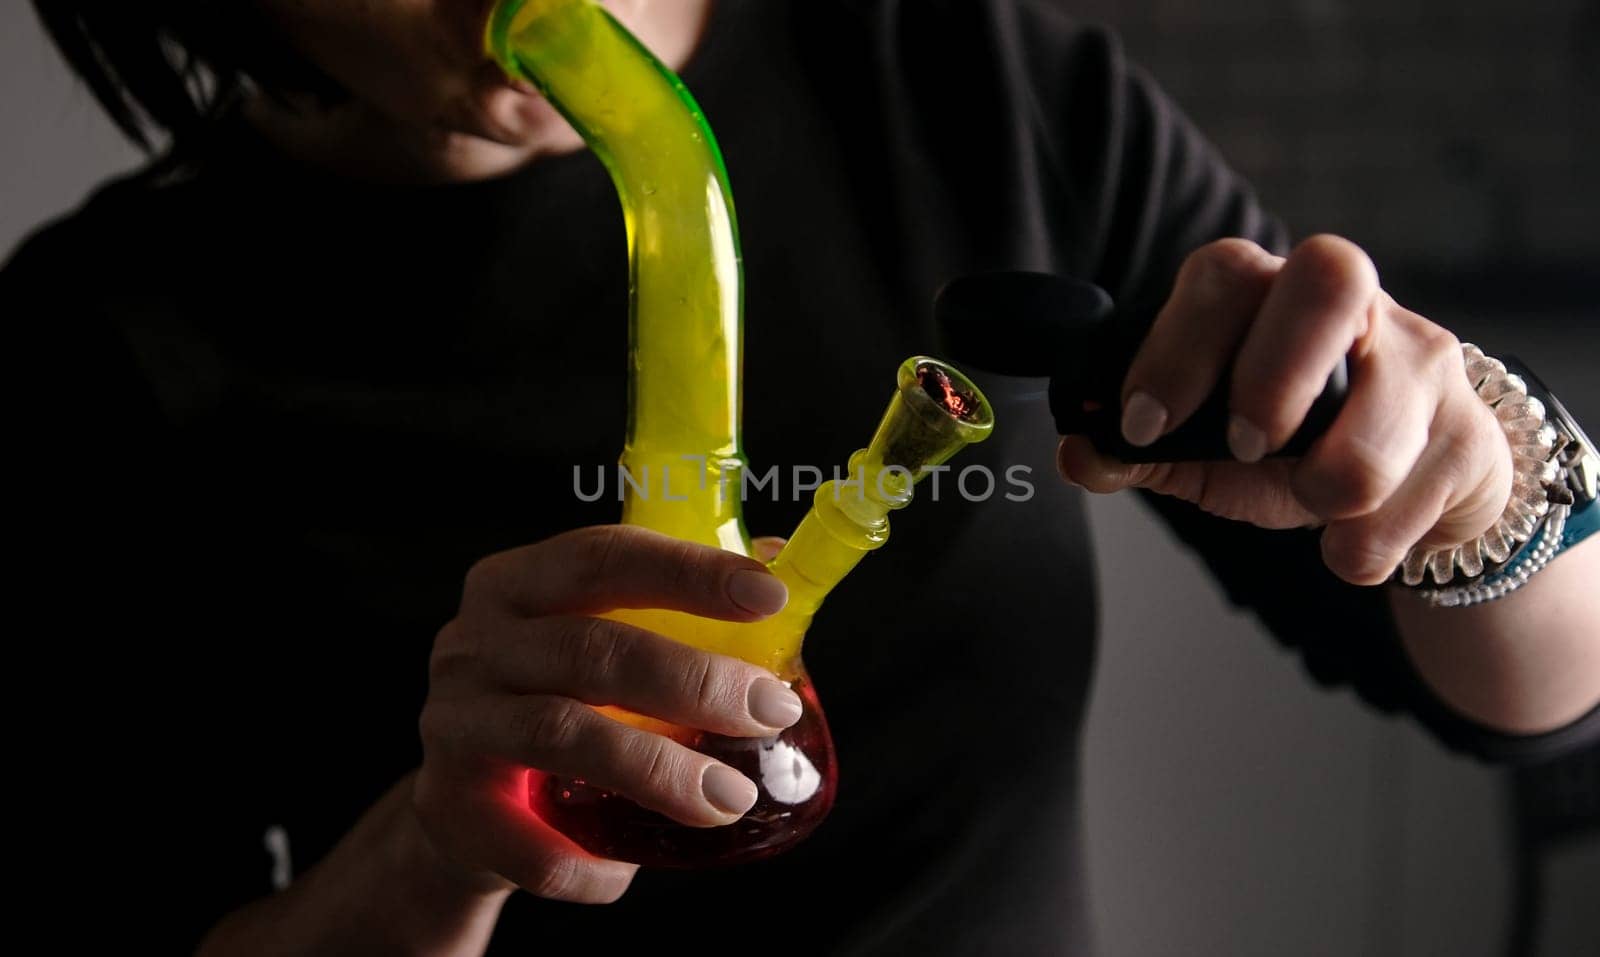 Burning And Smoking Hemp Leaves From A Bong, Flame Close-Up, With Female Hands